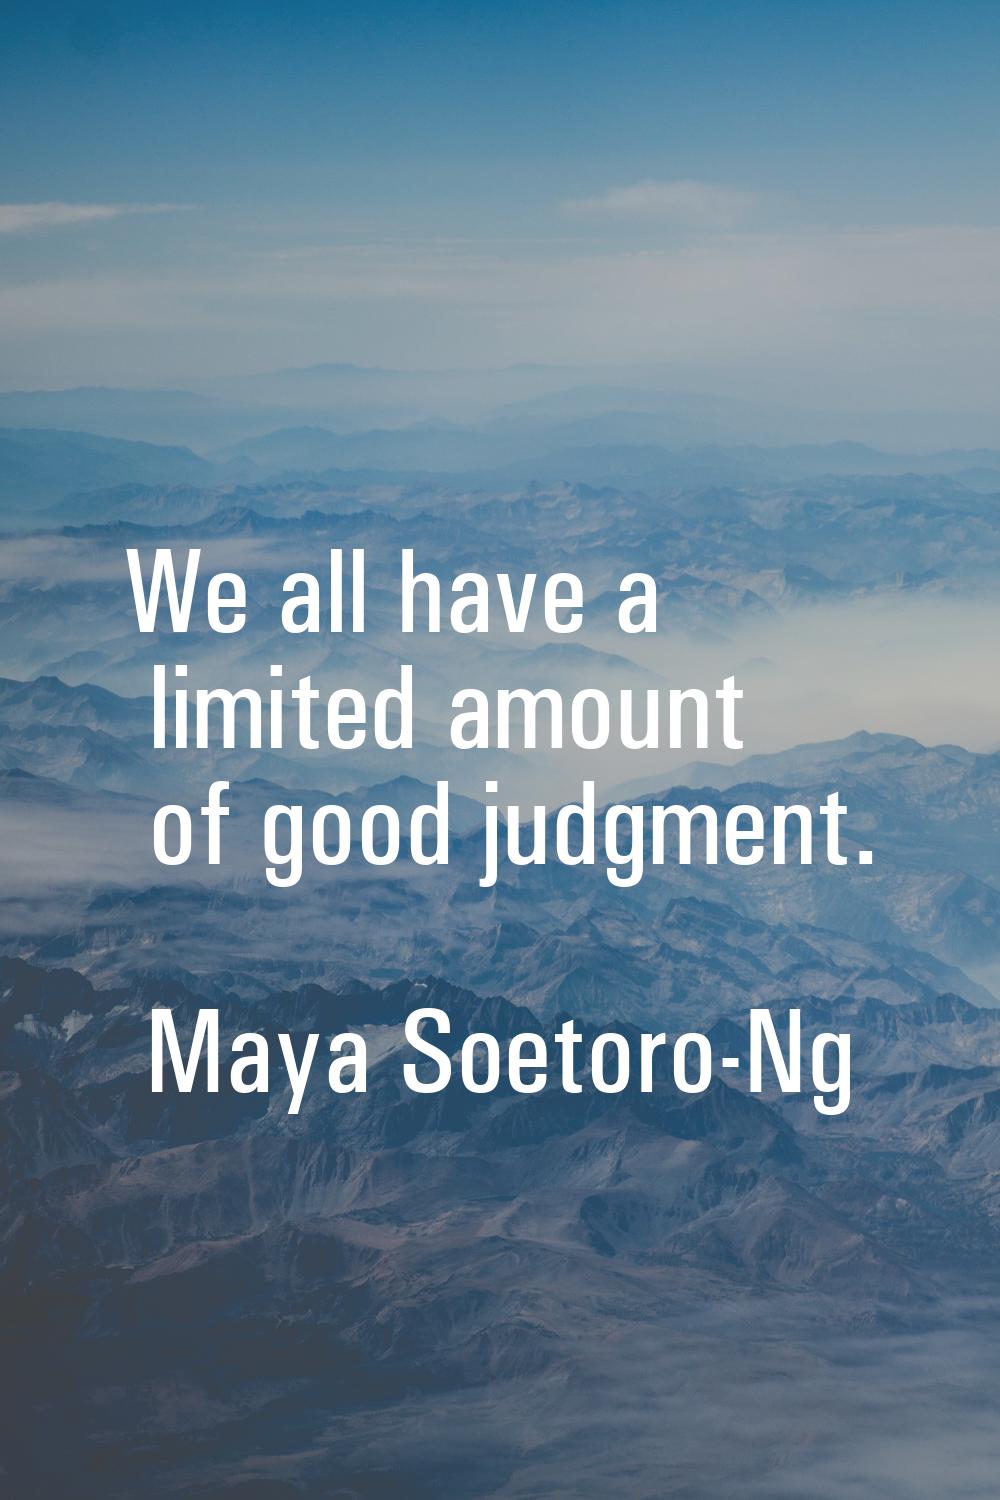 We all have a limited amount of good judgment.